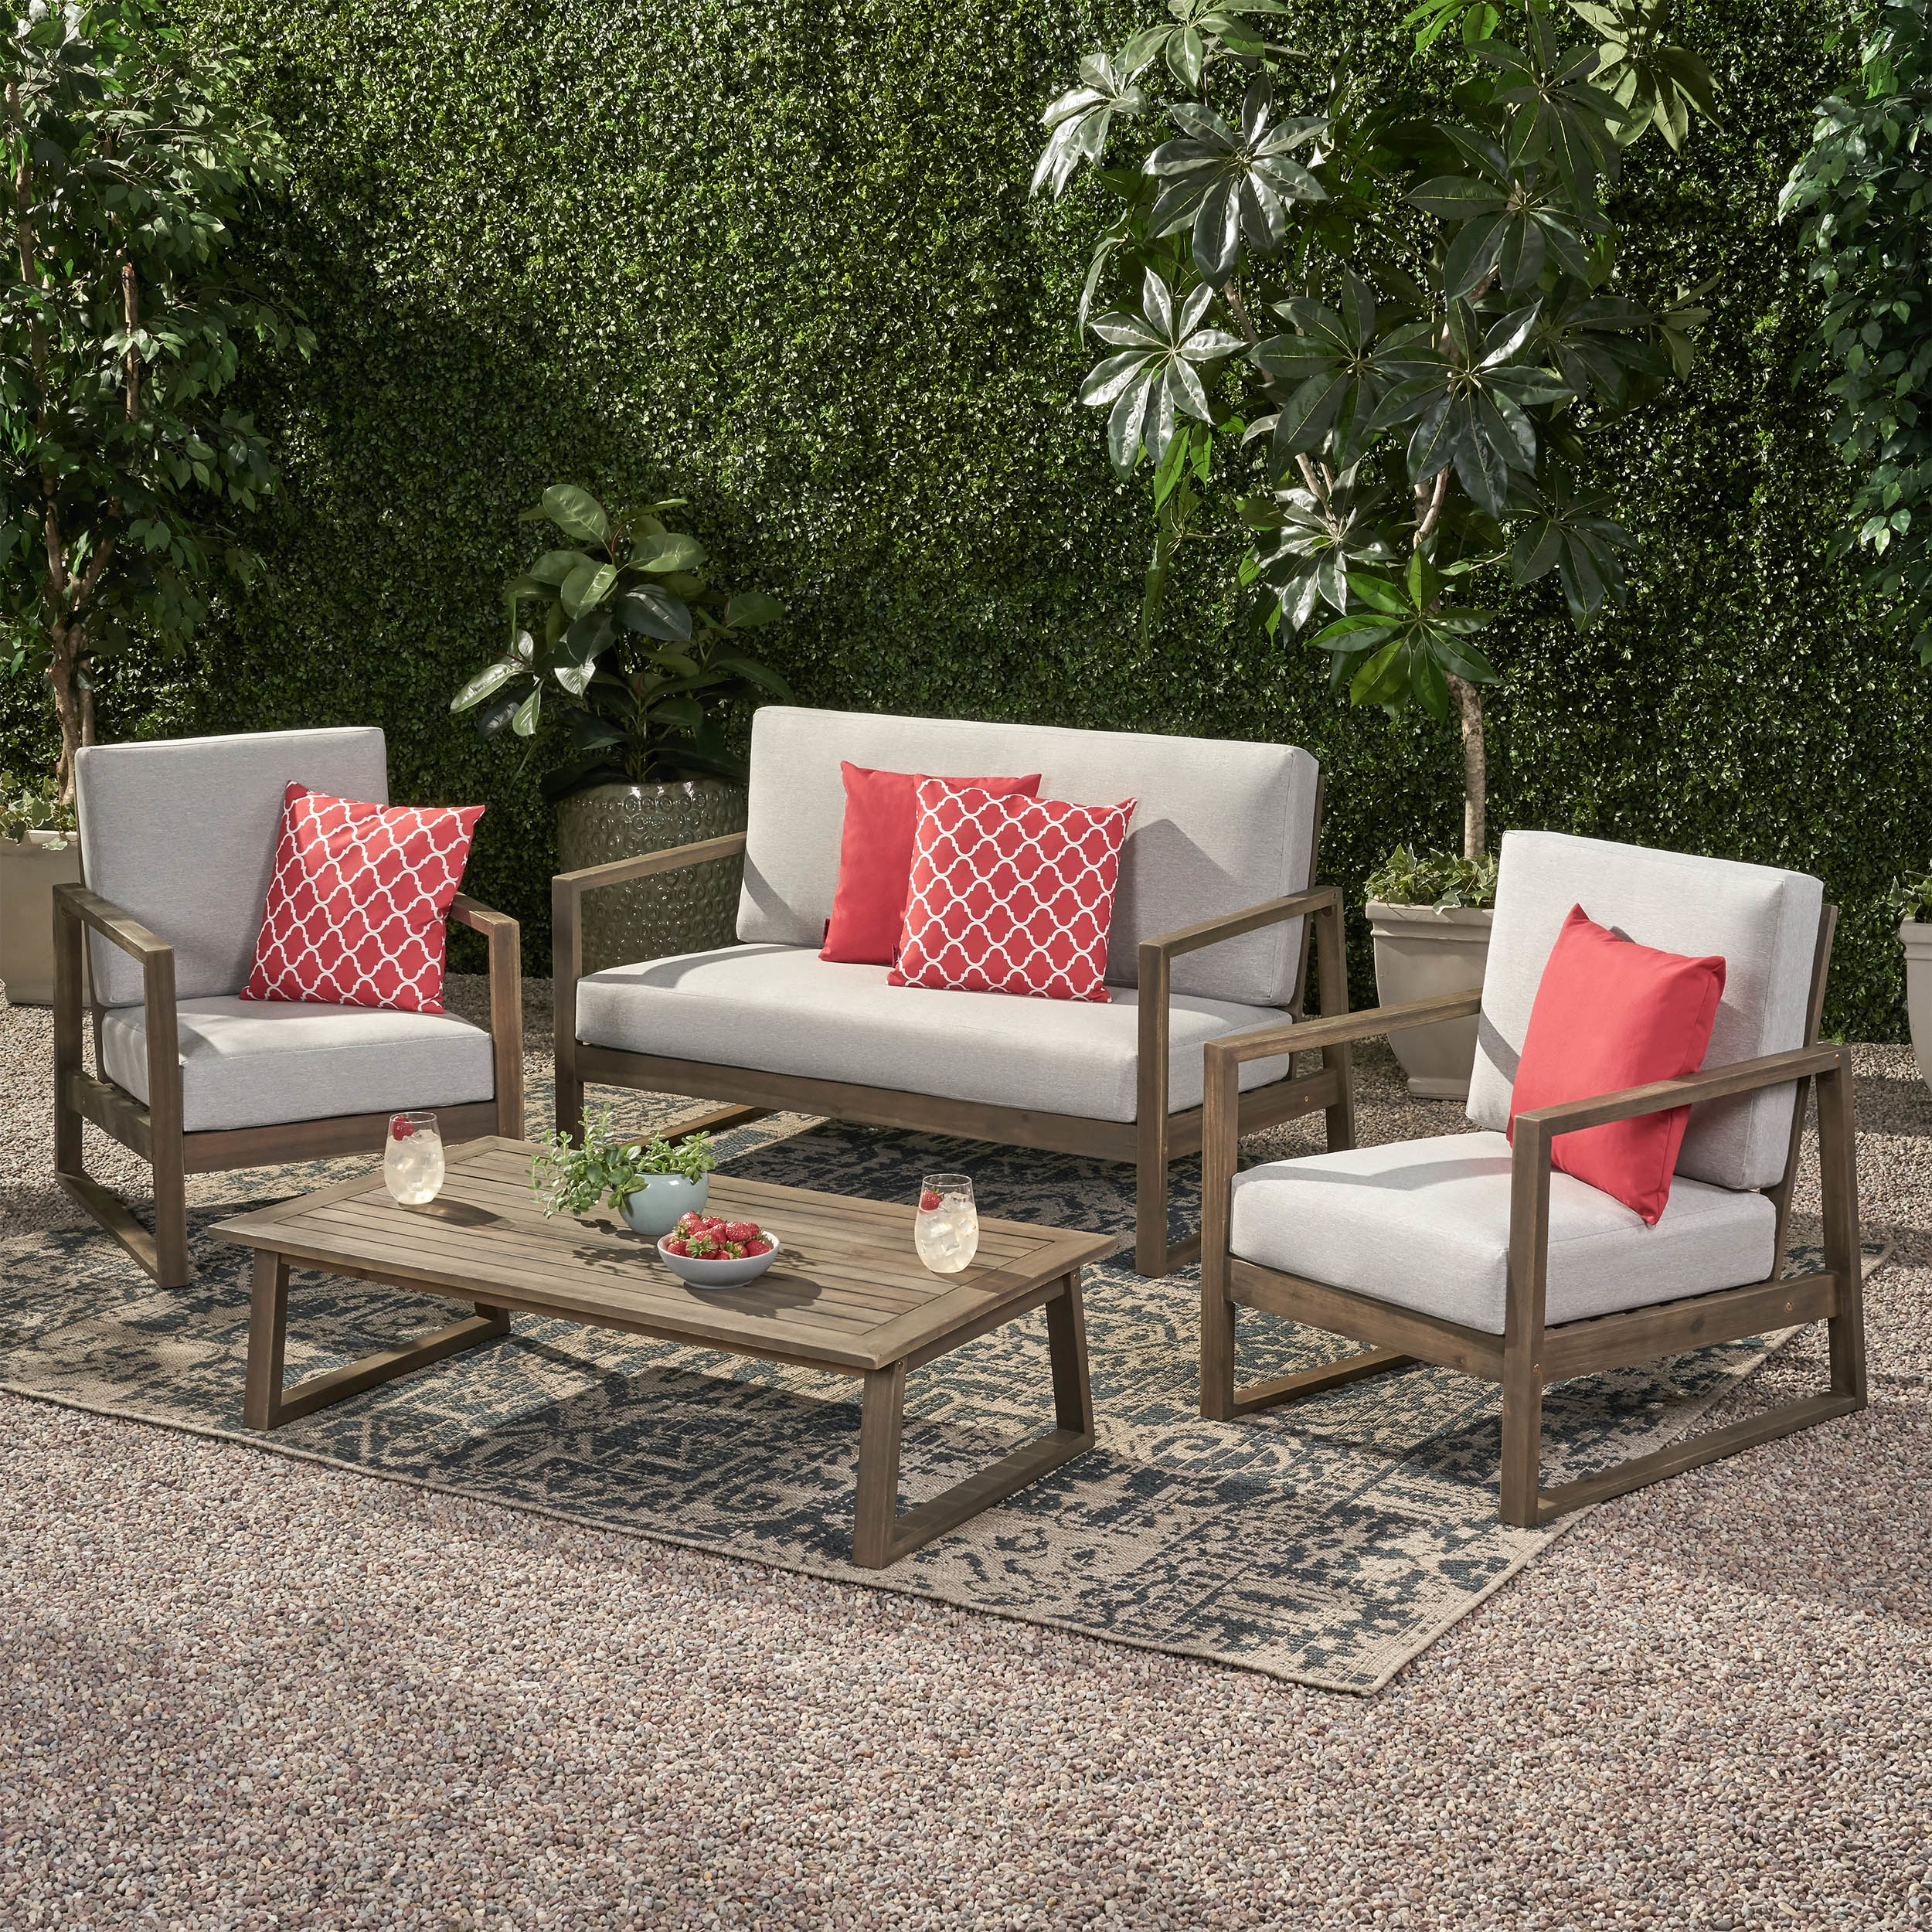 Regina Outdoor Acacia Wood 4 Seater Chat Set With Coffee Table - Gray Finish, Light Gray